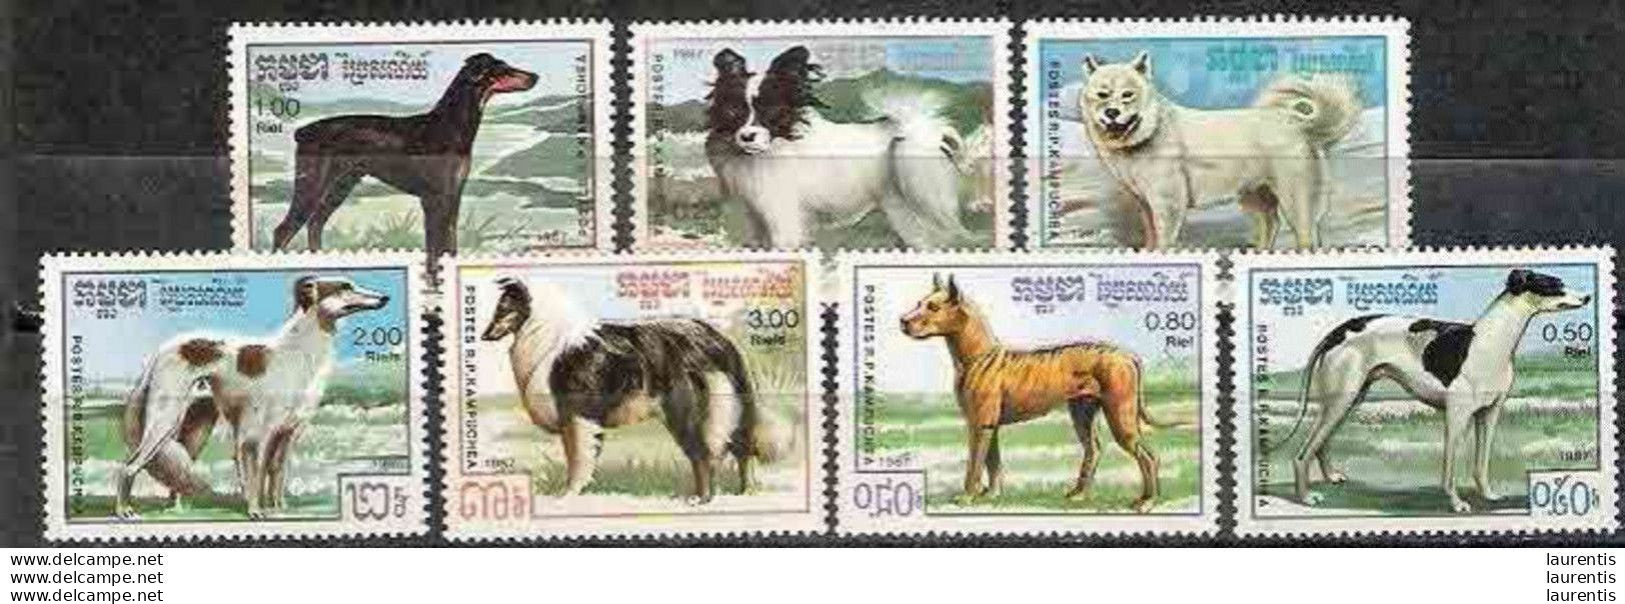 232  Dogs - Chiens - Kampuchea 719-25  MNH - 2,00 . - Honden